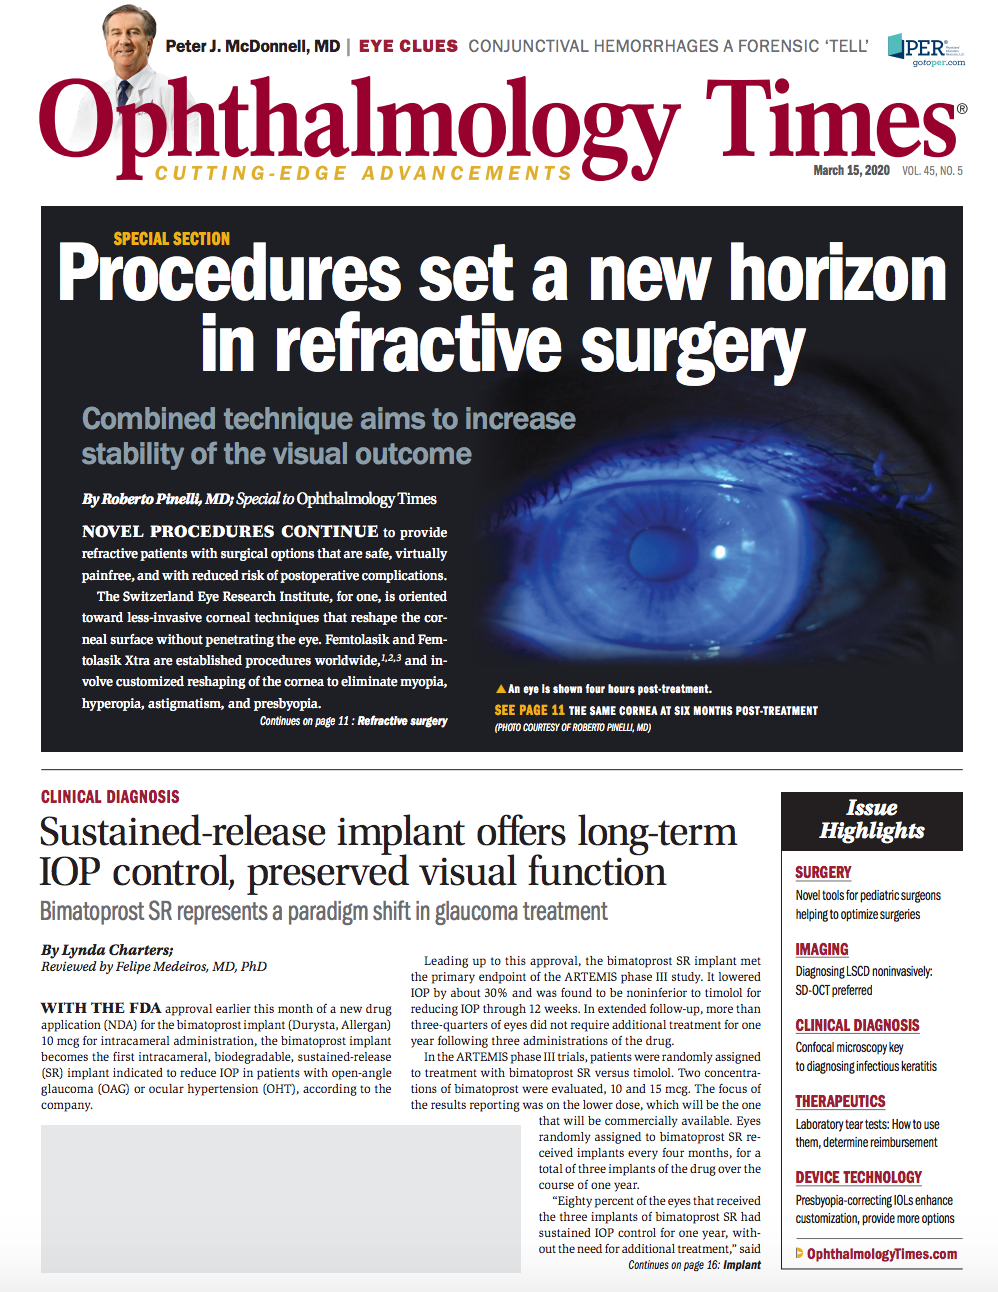 Ophthalmology Times: March 15, 2020